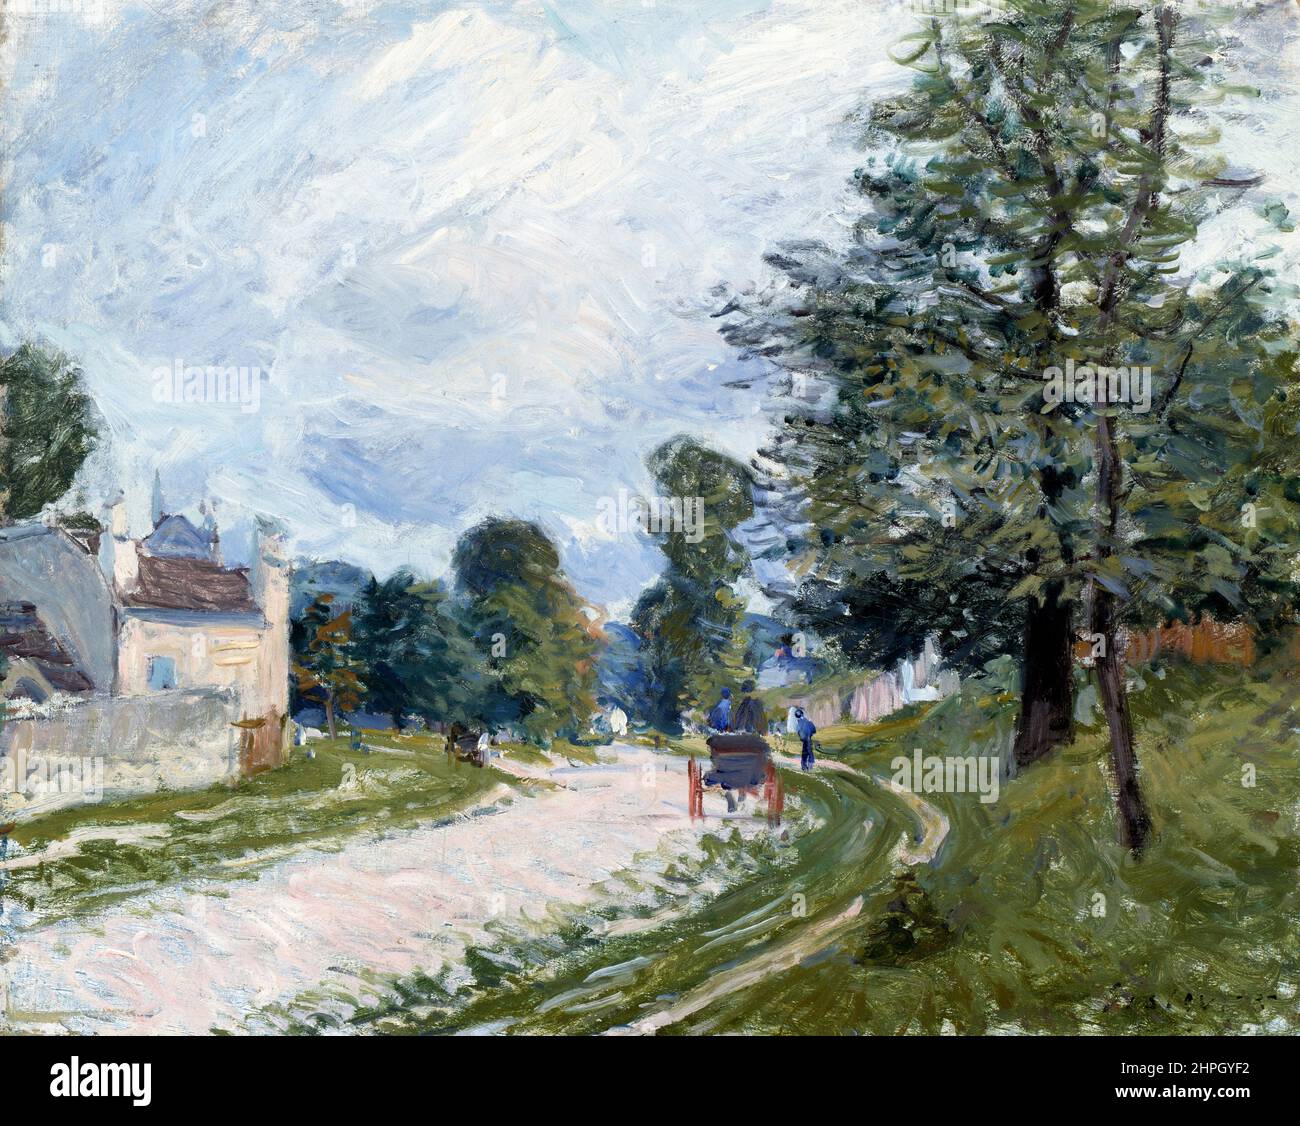 A Turn in the Road by Alfred Sisley (1839-1899), oil on canvas, 1873 Stock Photo